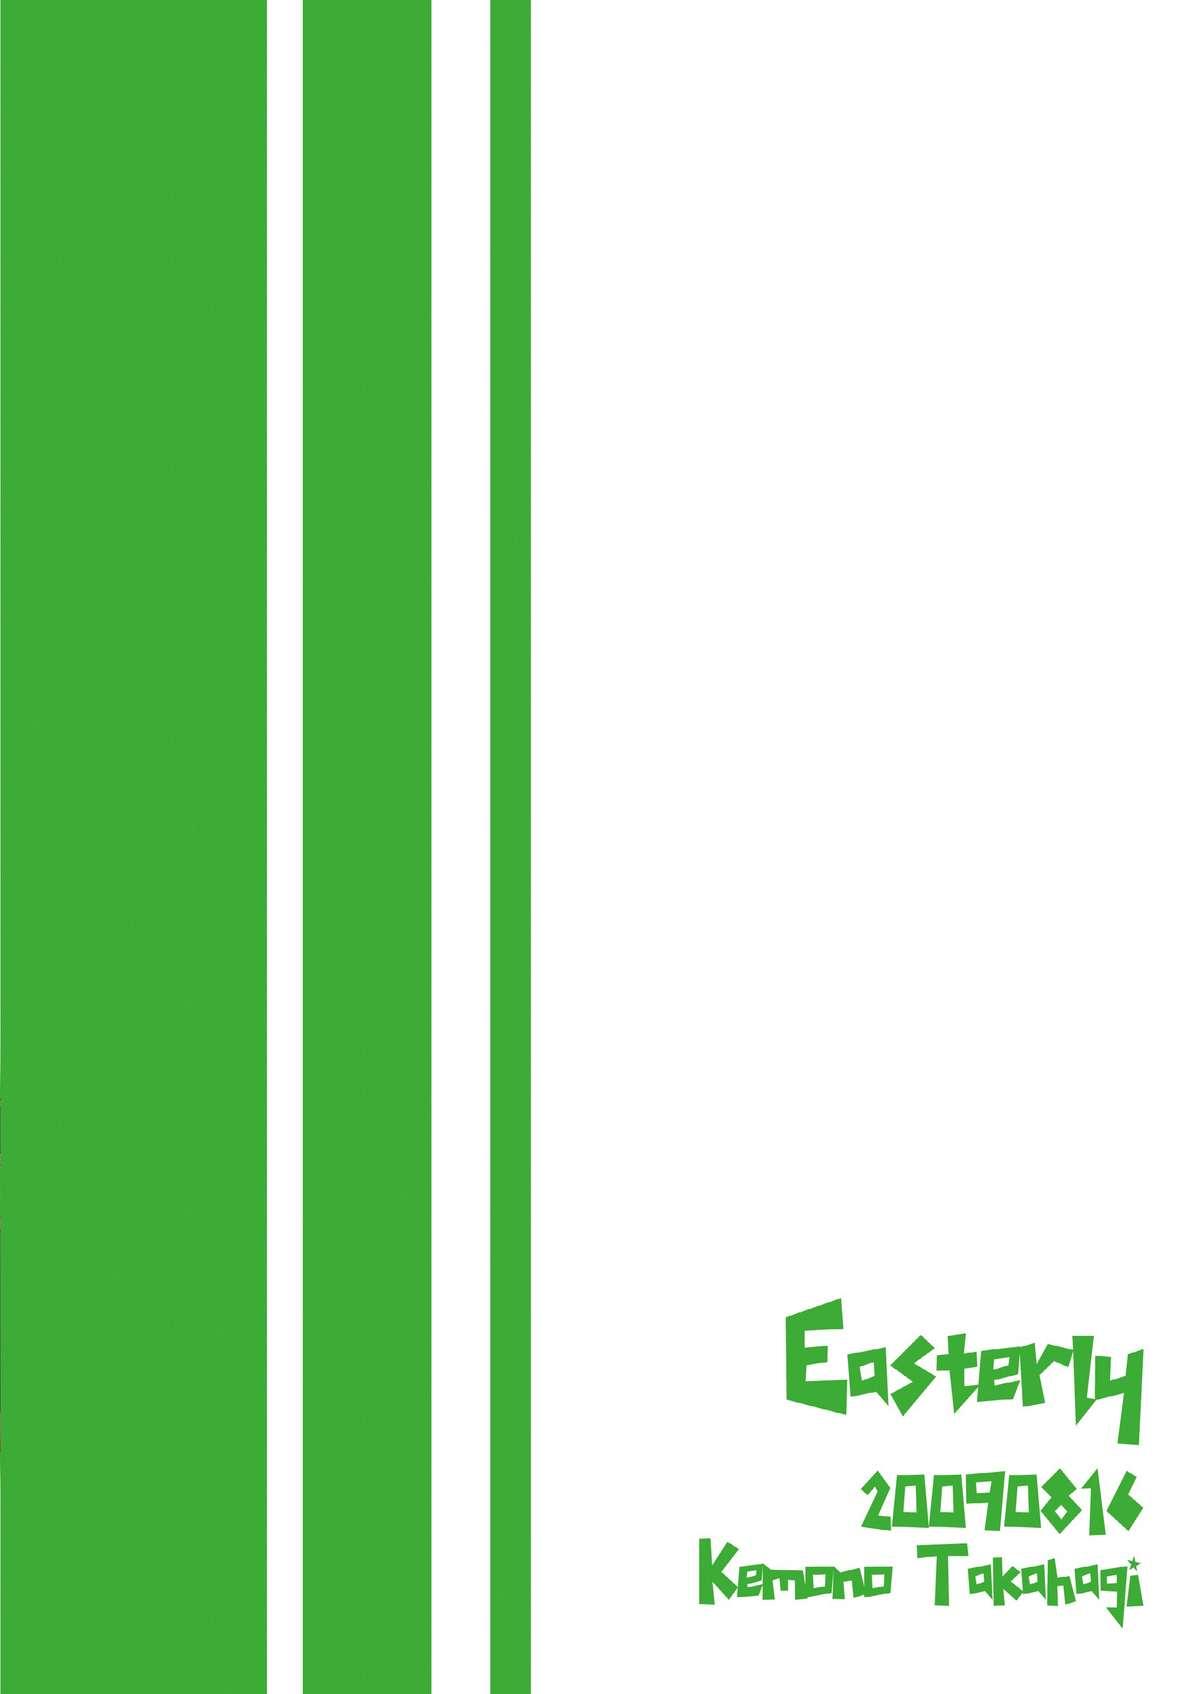 Easterly 23